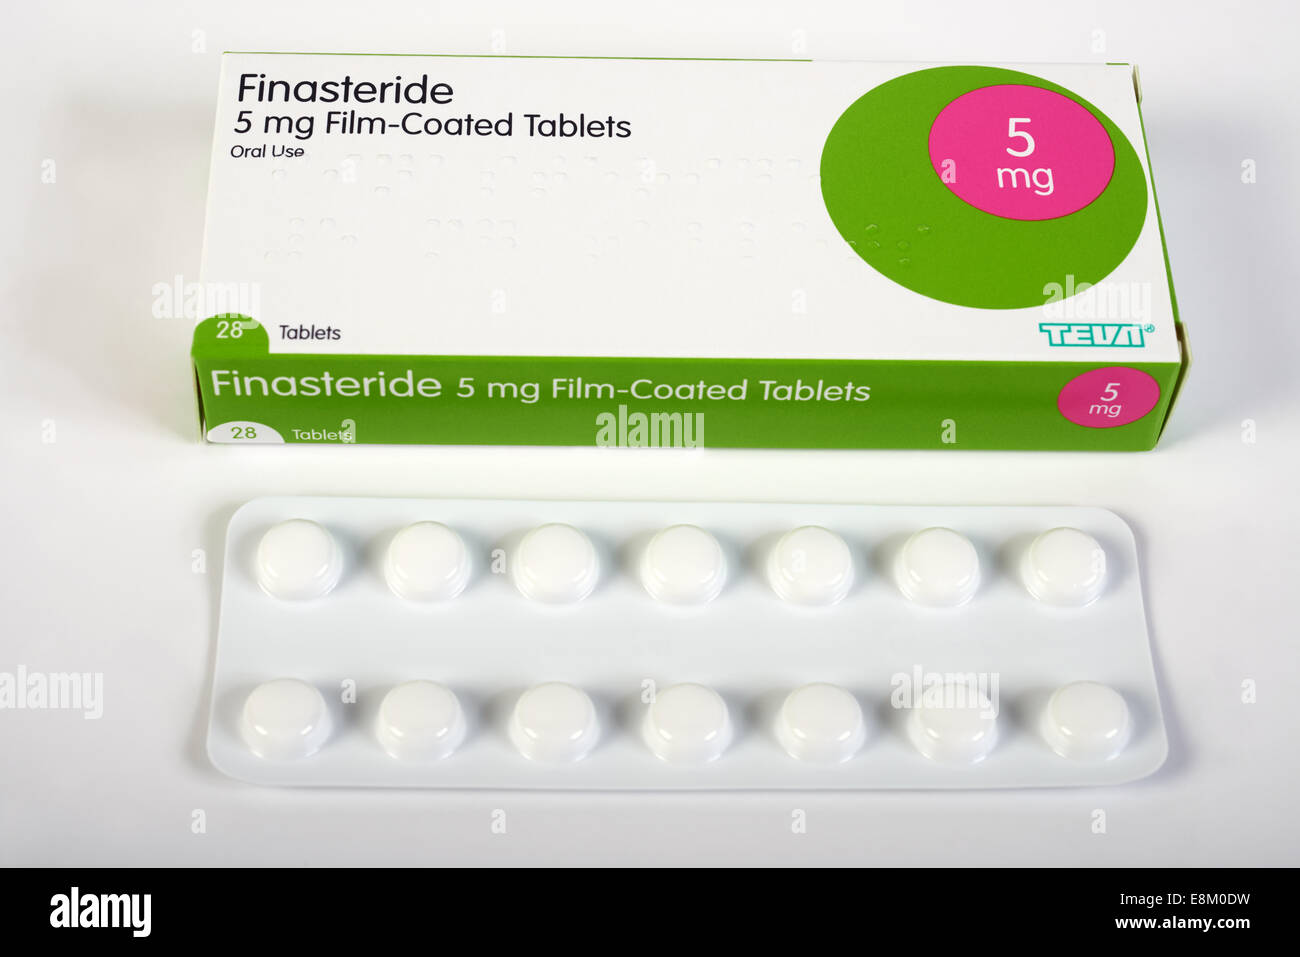 what is finasteride and what is it used for